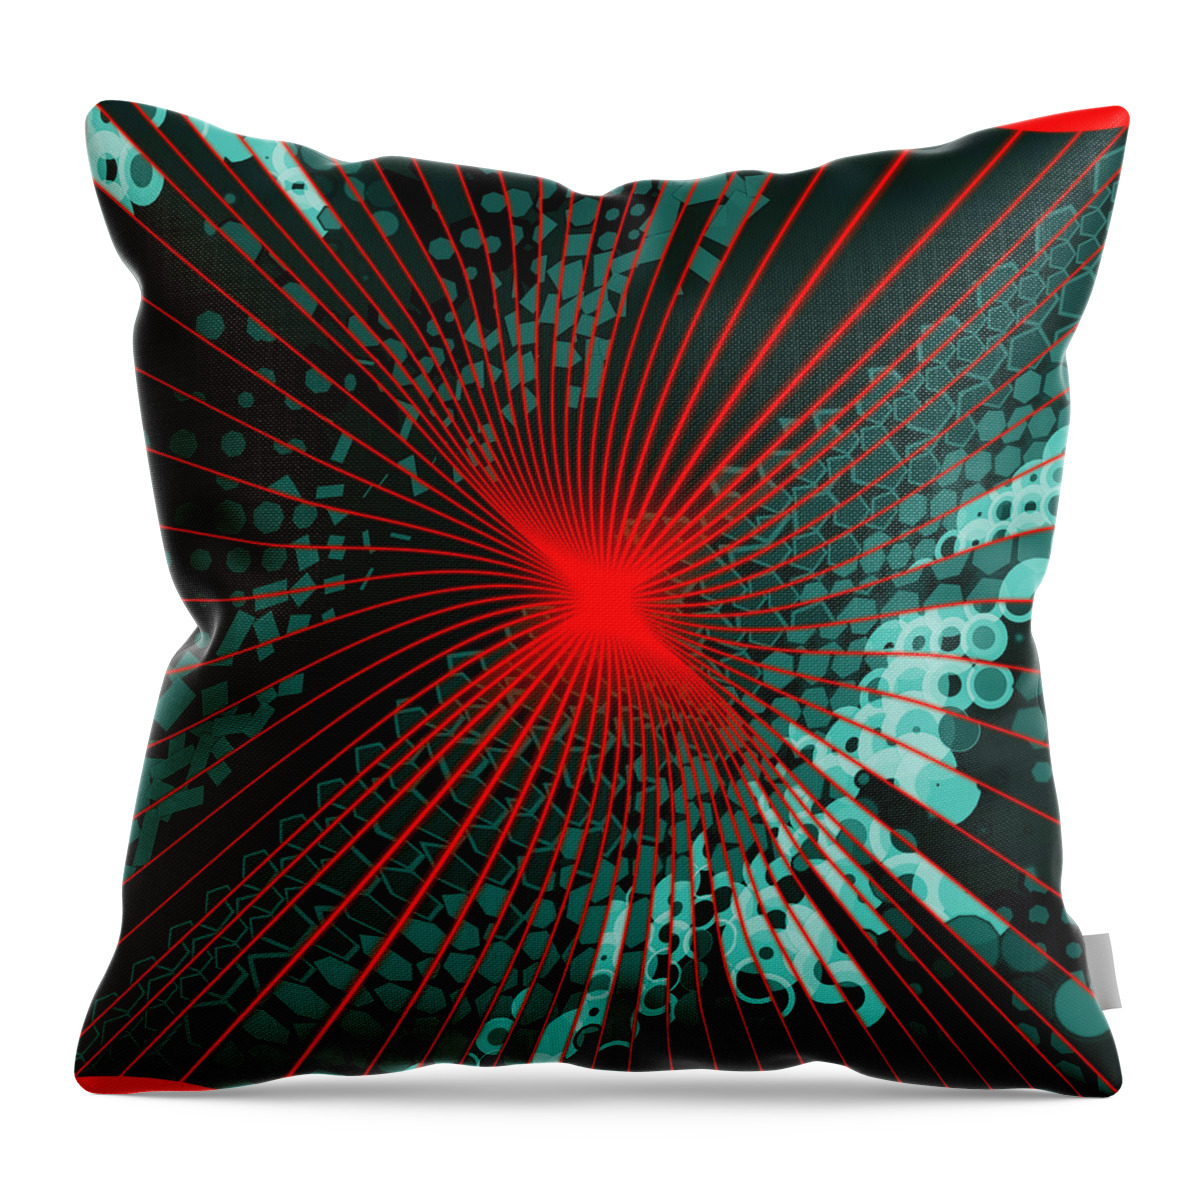 Abstract Throw Pillow featuring the digital art Pattern 43 by Marko Sabotin